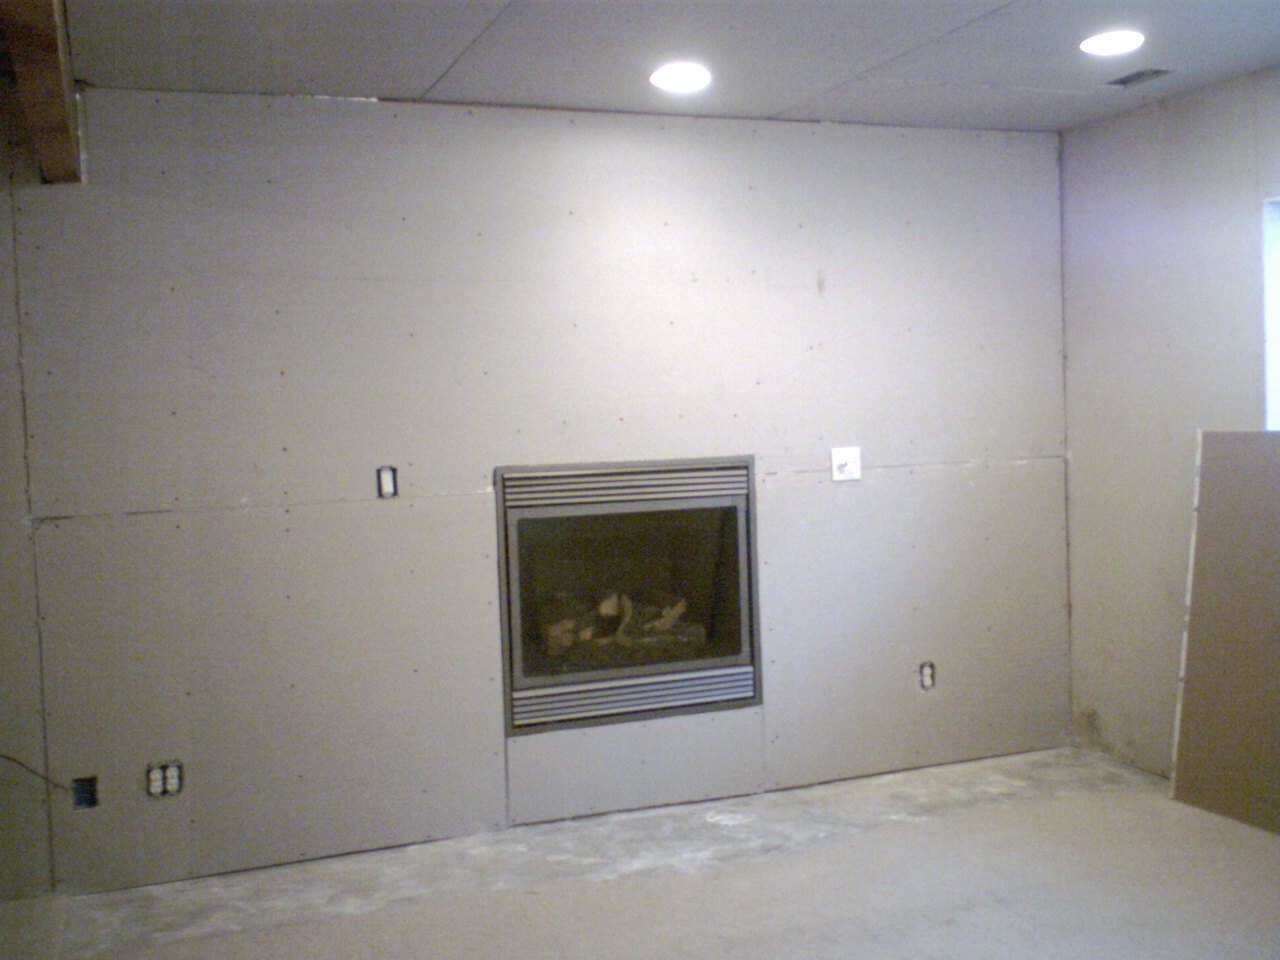 Cement Board Fireplace Best Of Tile Over Fireplace Vr17 – Roc Munity